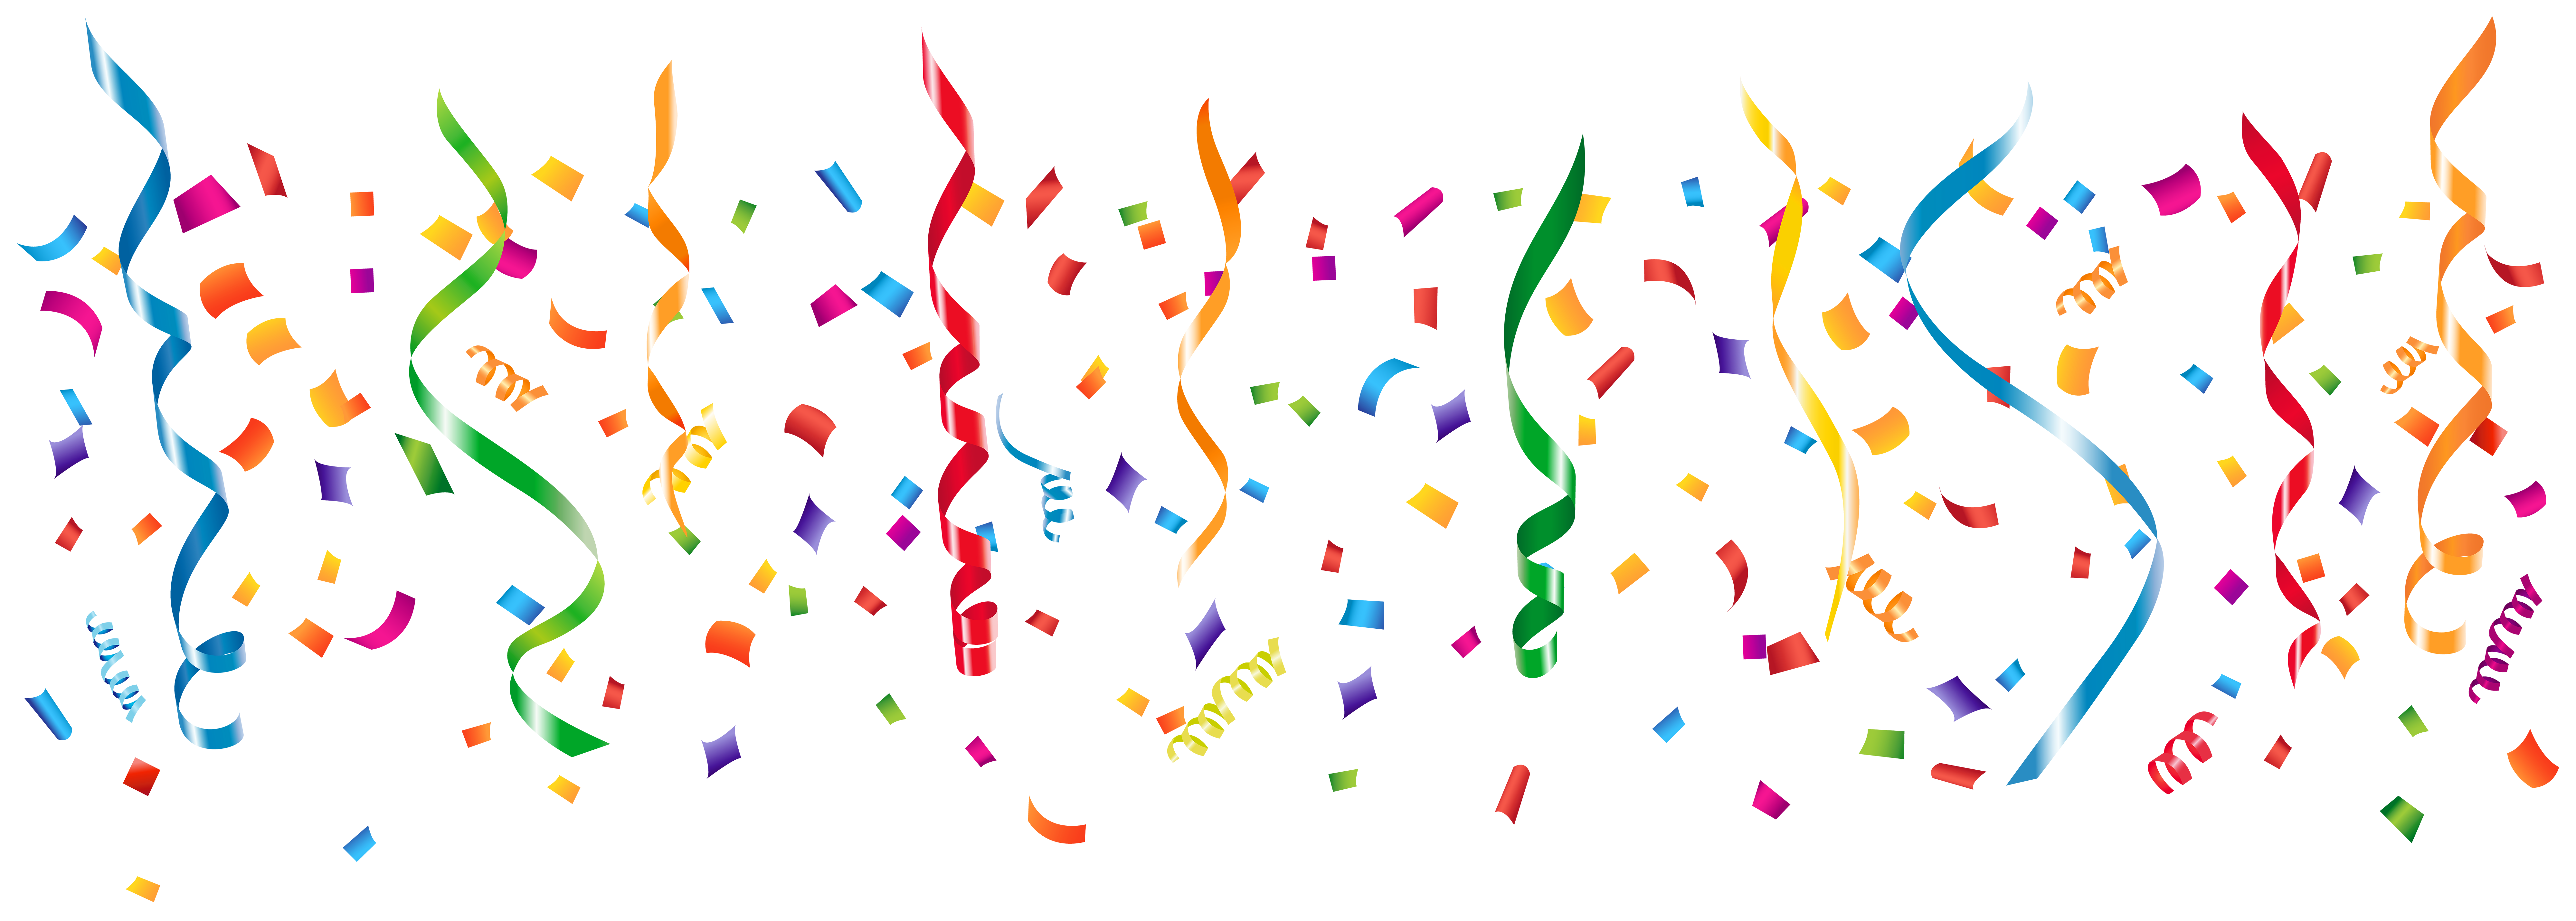 streamers clipart party theme